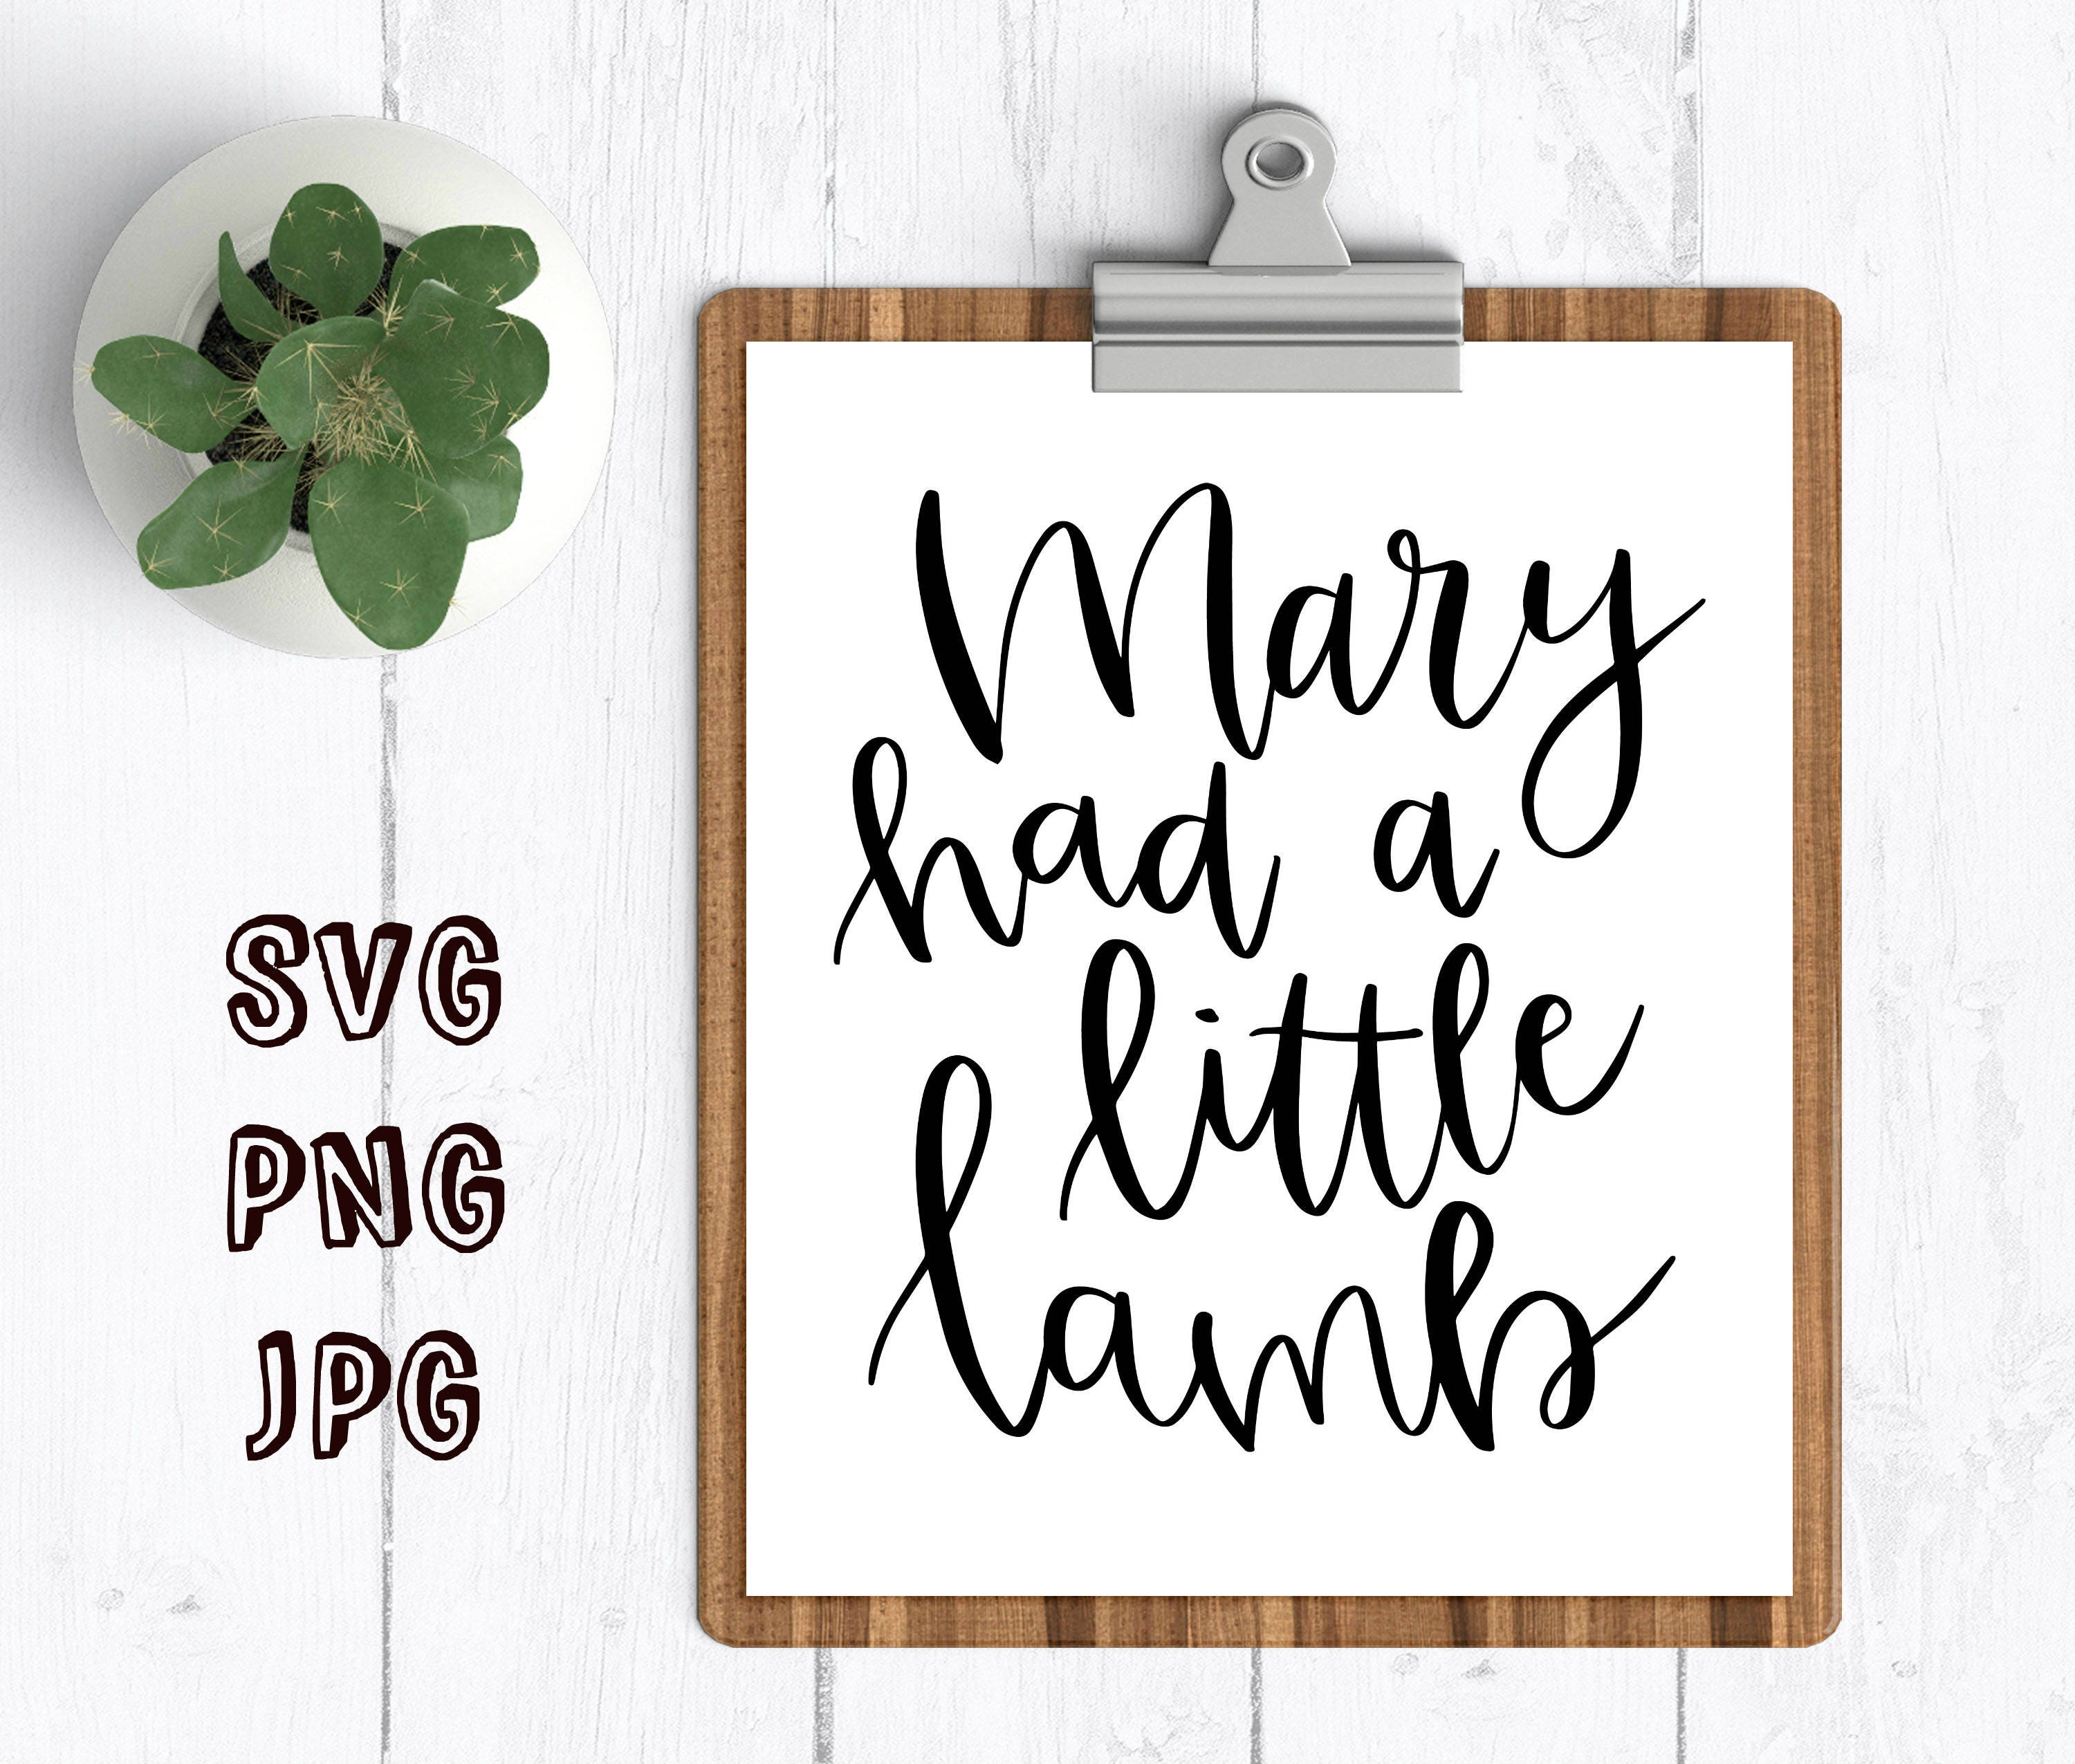 Download nursery rhyme svg design mary had a little lamb svg cut file